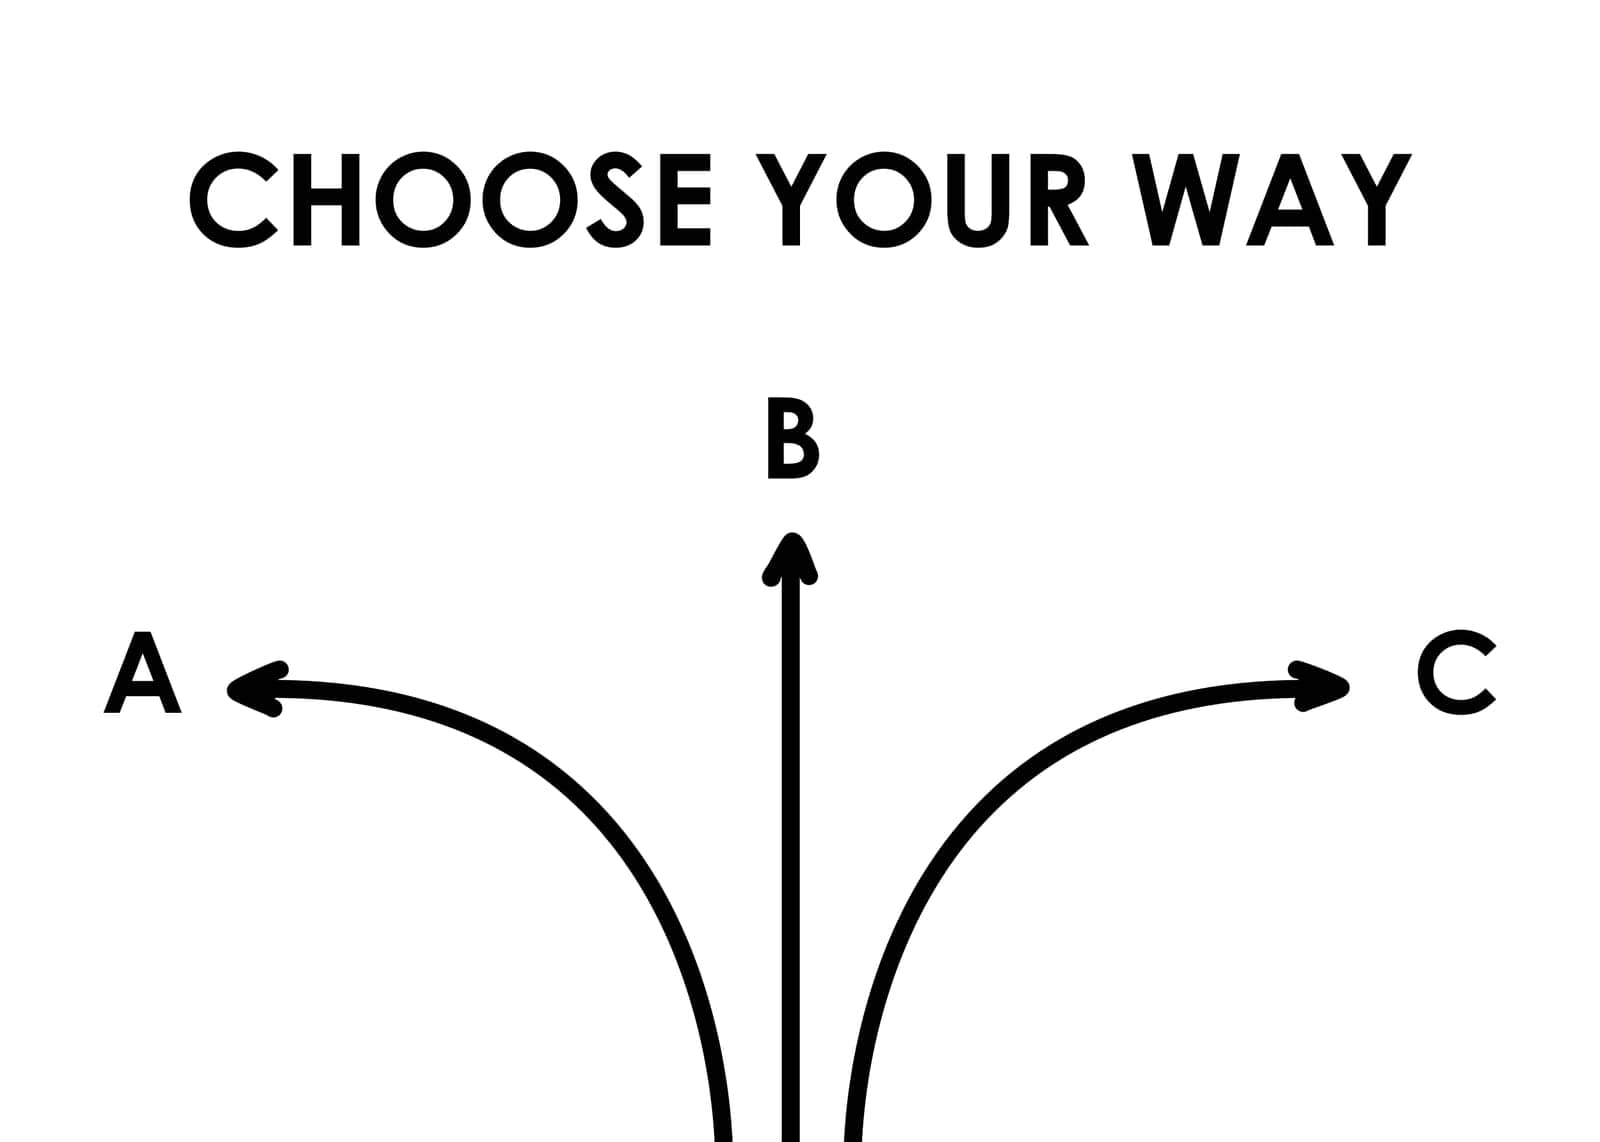 Choose your way concept with different arrows vector illustration. Different plans, roads banner choose your path.